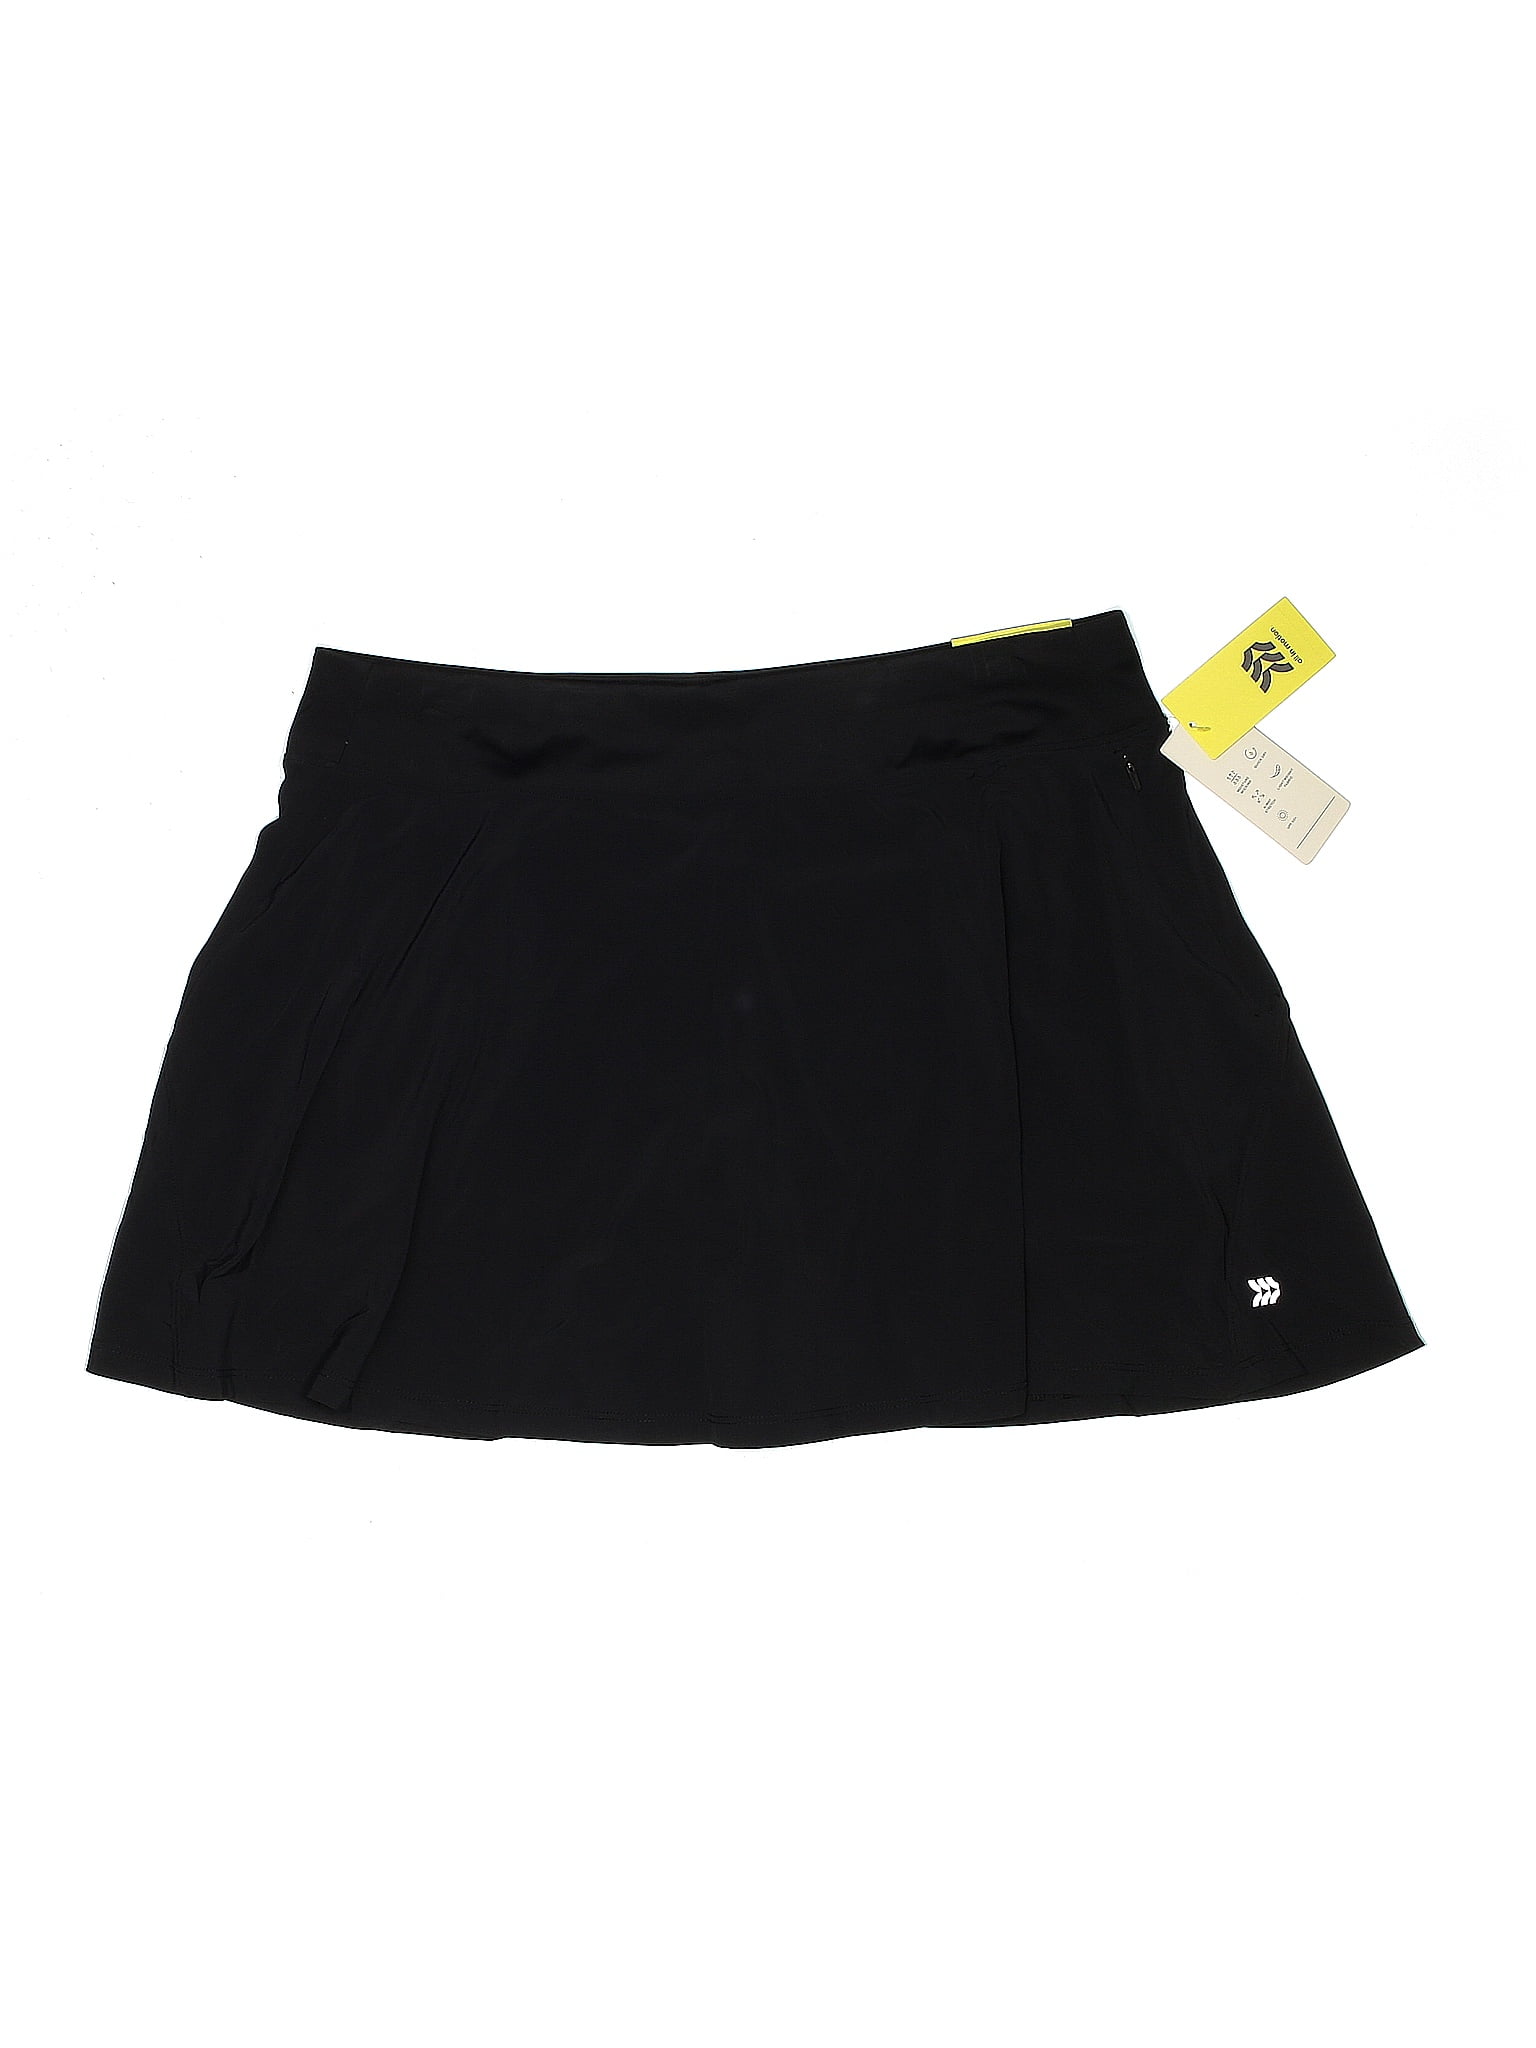 Skirt Sports Women's Clothing On Sale Up To 90% Off Retail